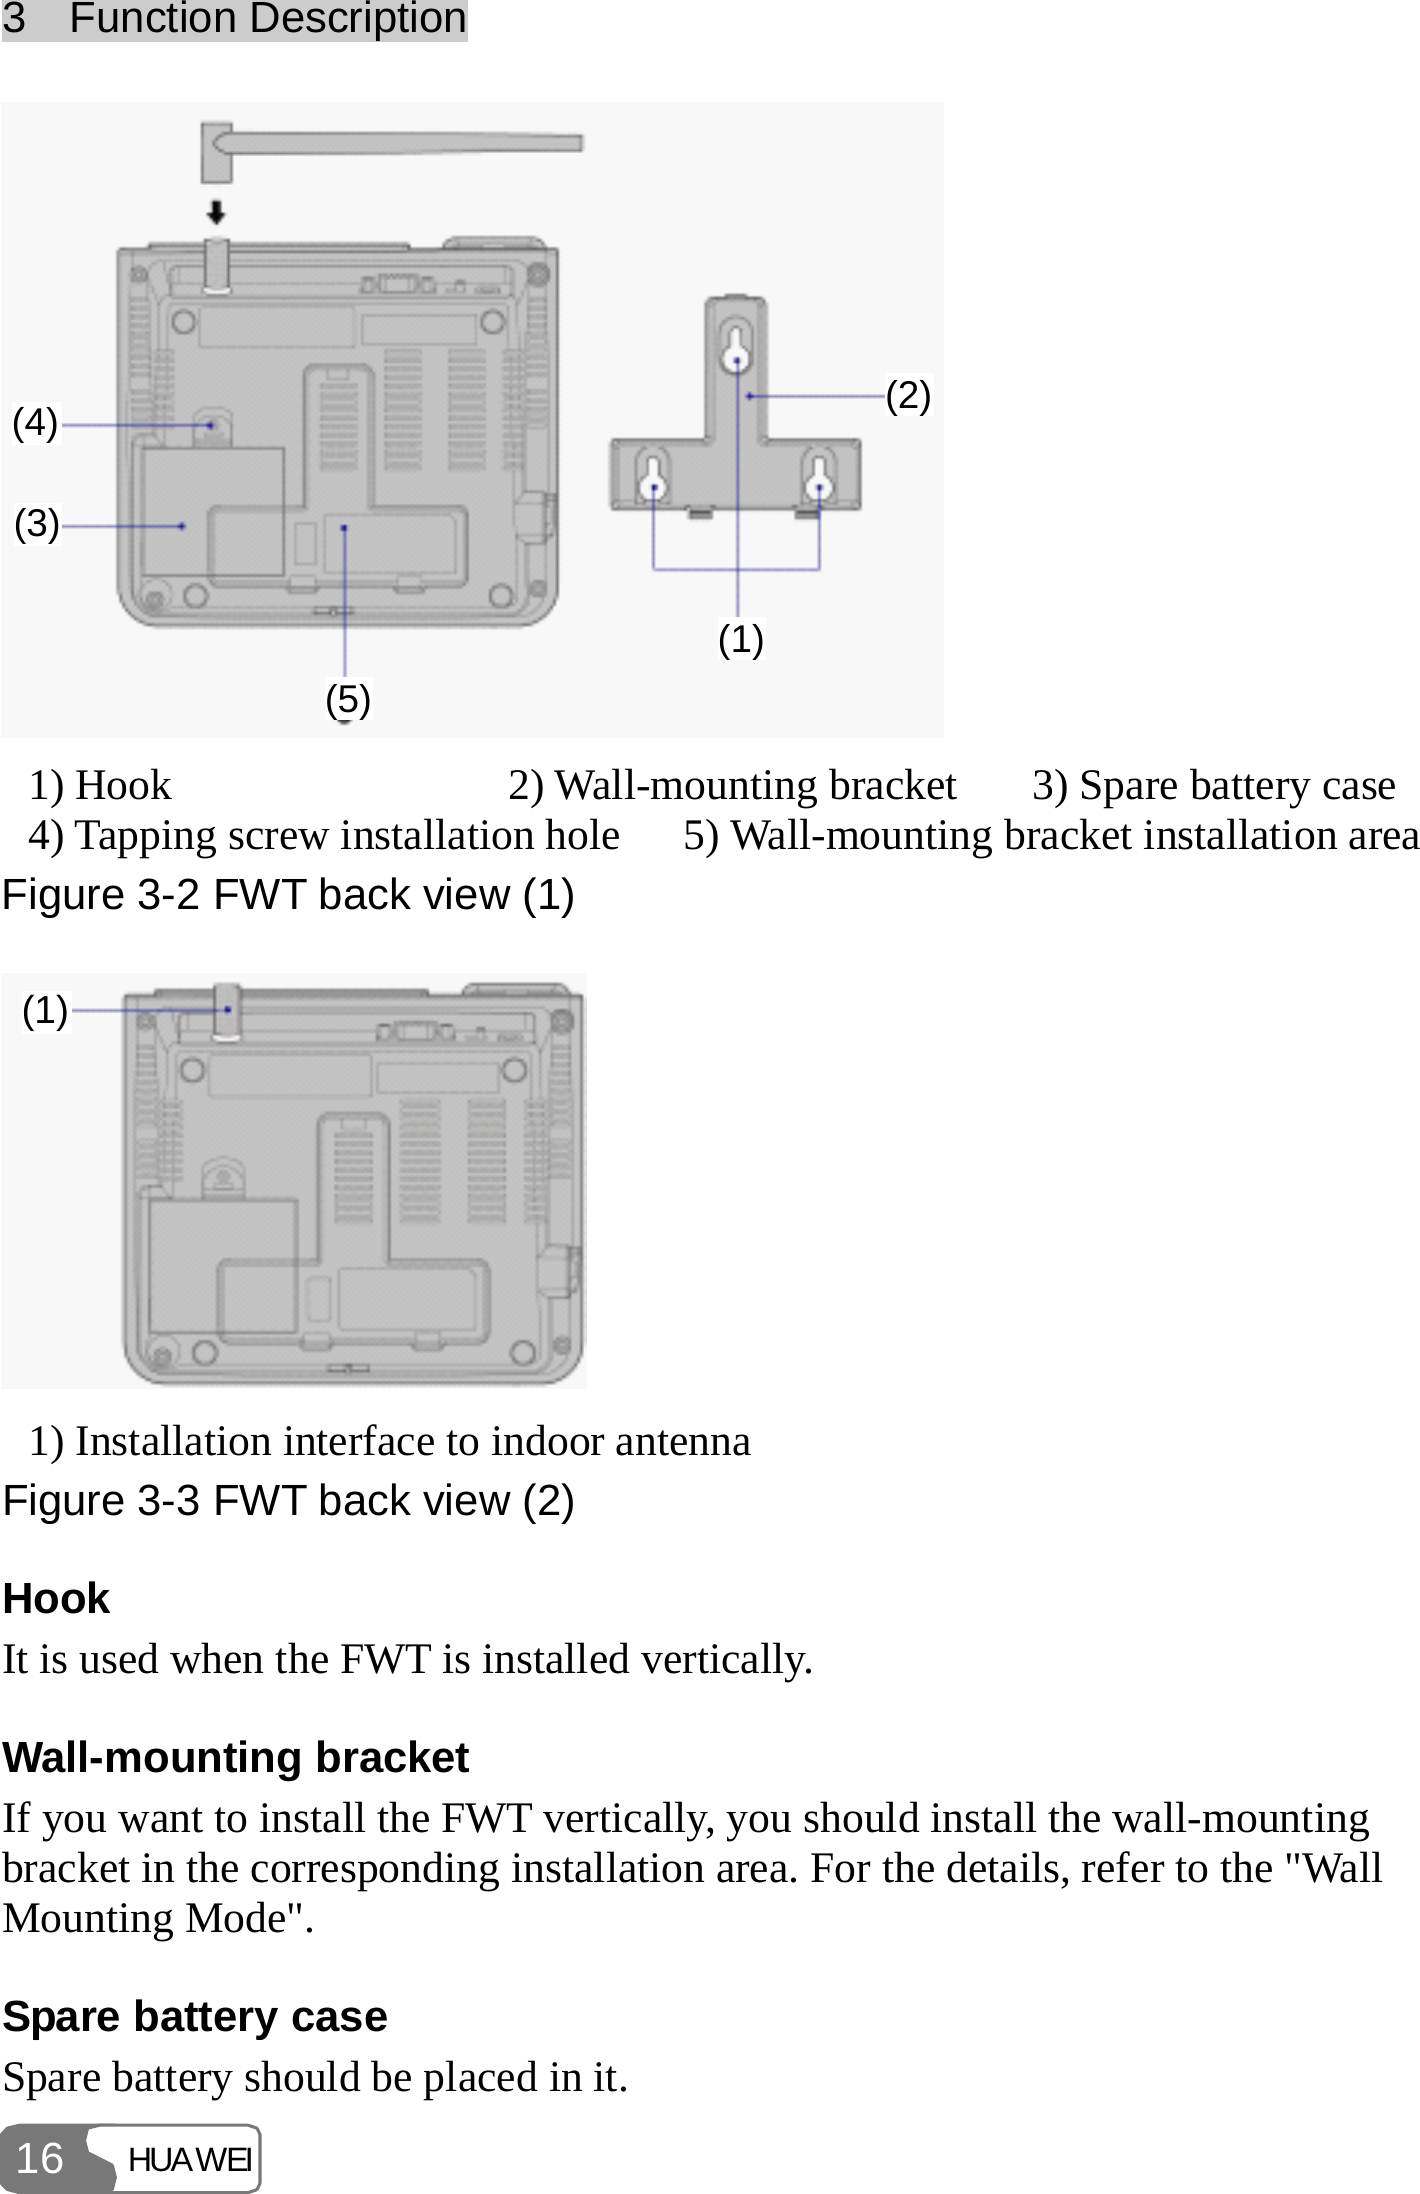 3  Function Description HUAWEI 16 4(1)(2)(3)(4)(5)  1) Hook  2) Wall-mounting bracket  3) Spare battery case 4) Tapping screw installation hole 5) Wall-mounting bracket installation areaFigure 3-2 FWT back view (1) (1) 1) Installation interface to indoor antenna Figure 3-3 FWT back view (2) Hook It is used when the FWT is installed vertically. Wall-mounting bracket If you want to install the FWT vertically, you should install the wall-mounting bracket in the corresponding installation area. For the details, refer to the &quot;Wall Mounting Mode&quot;. Spare battery case Spare battery should be placed in it. 